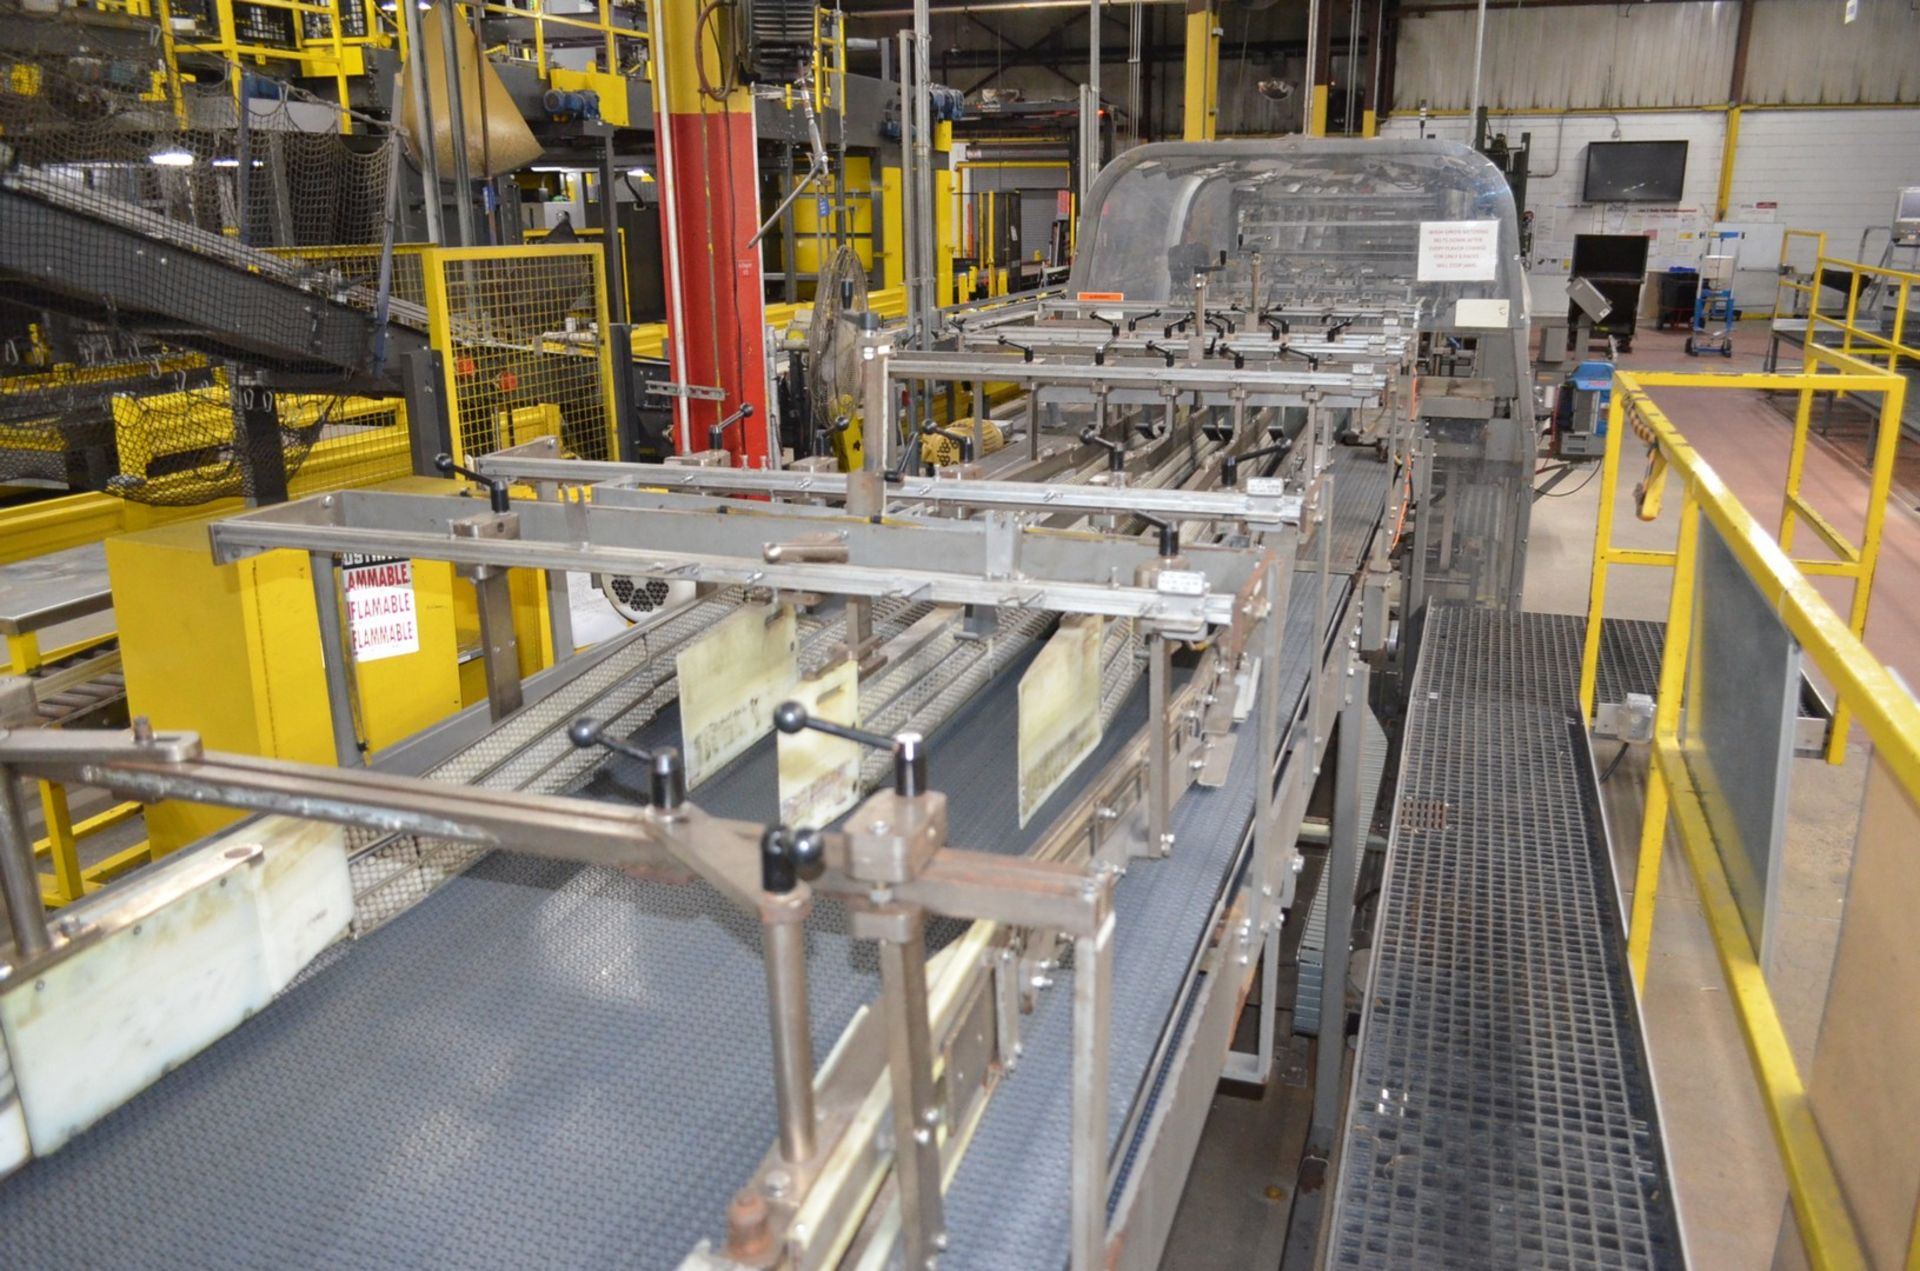 Douglas Contour Complete Stainless Steel, Inline, Tray Packer with Infeed Laner Conveyor, Gull - Image 11 of 11